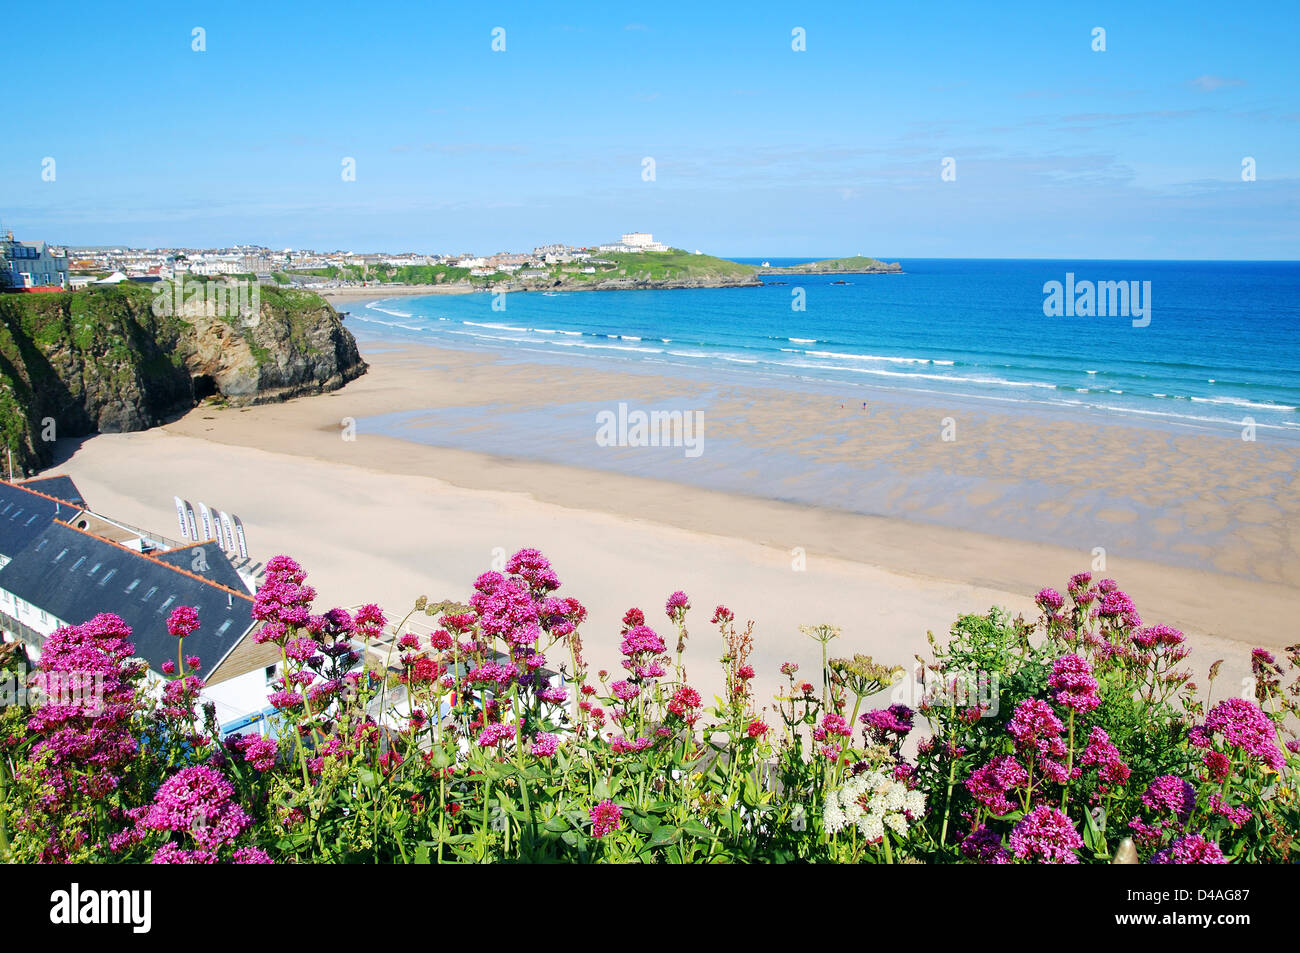 Tolcarne beach, Newquay, Cornwall, England, UK Banque D'Images